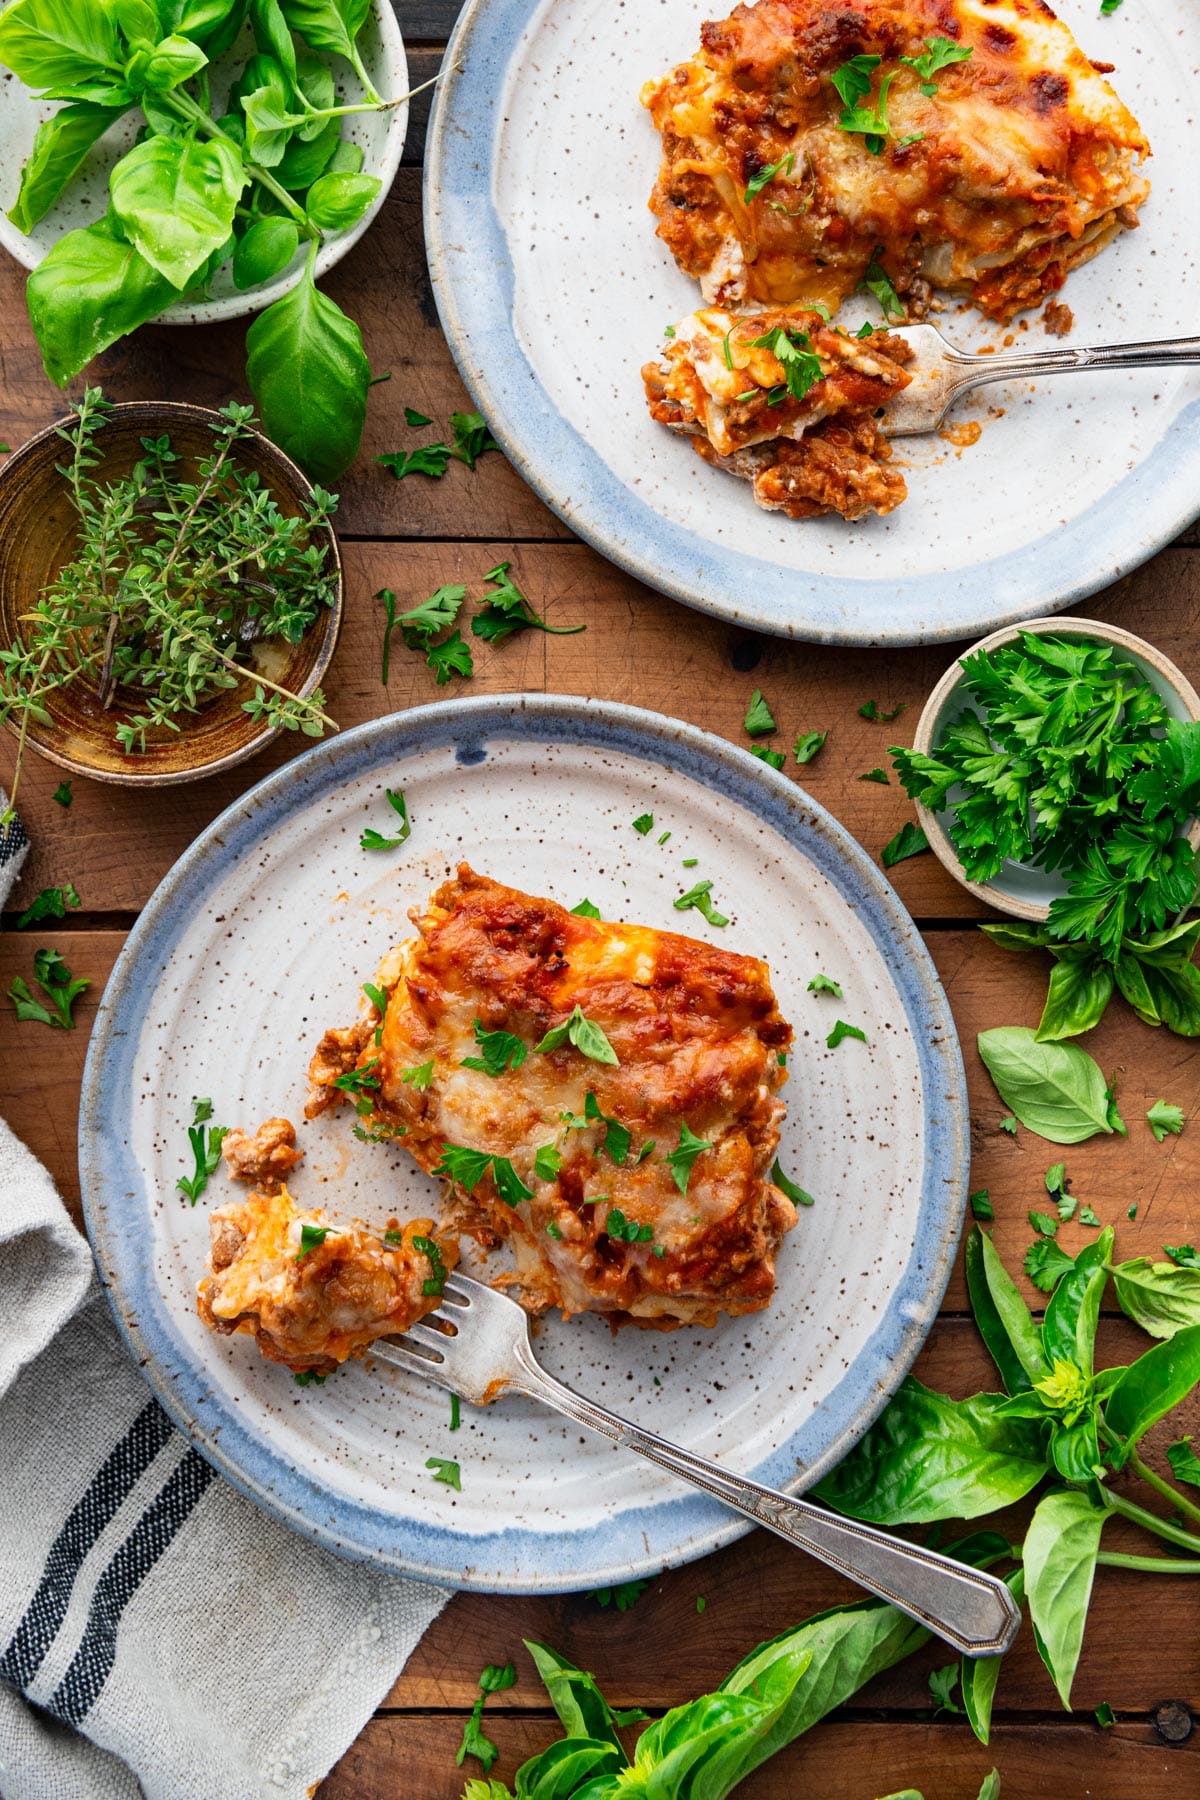 Two plates of classic homemade lasagna recipe on a wooden dinner table.